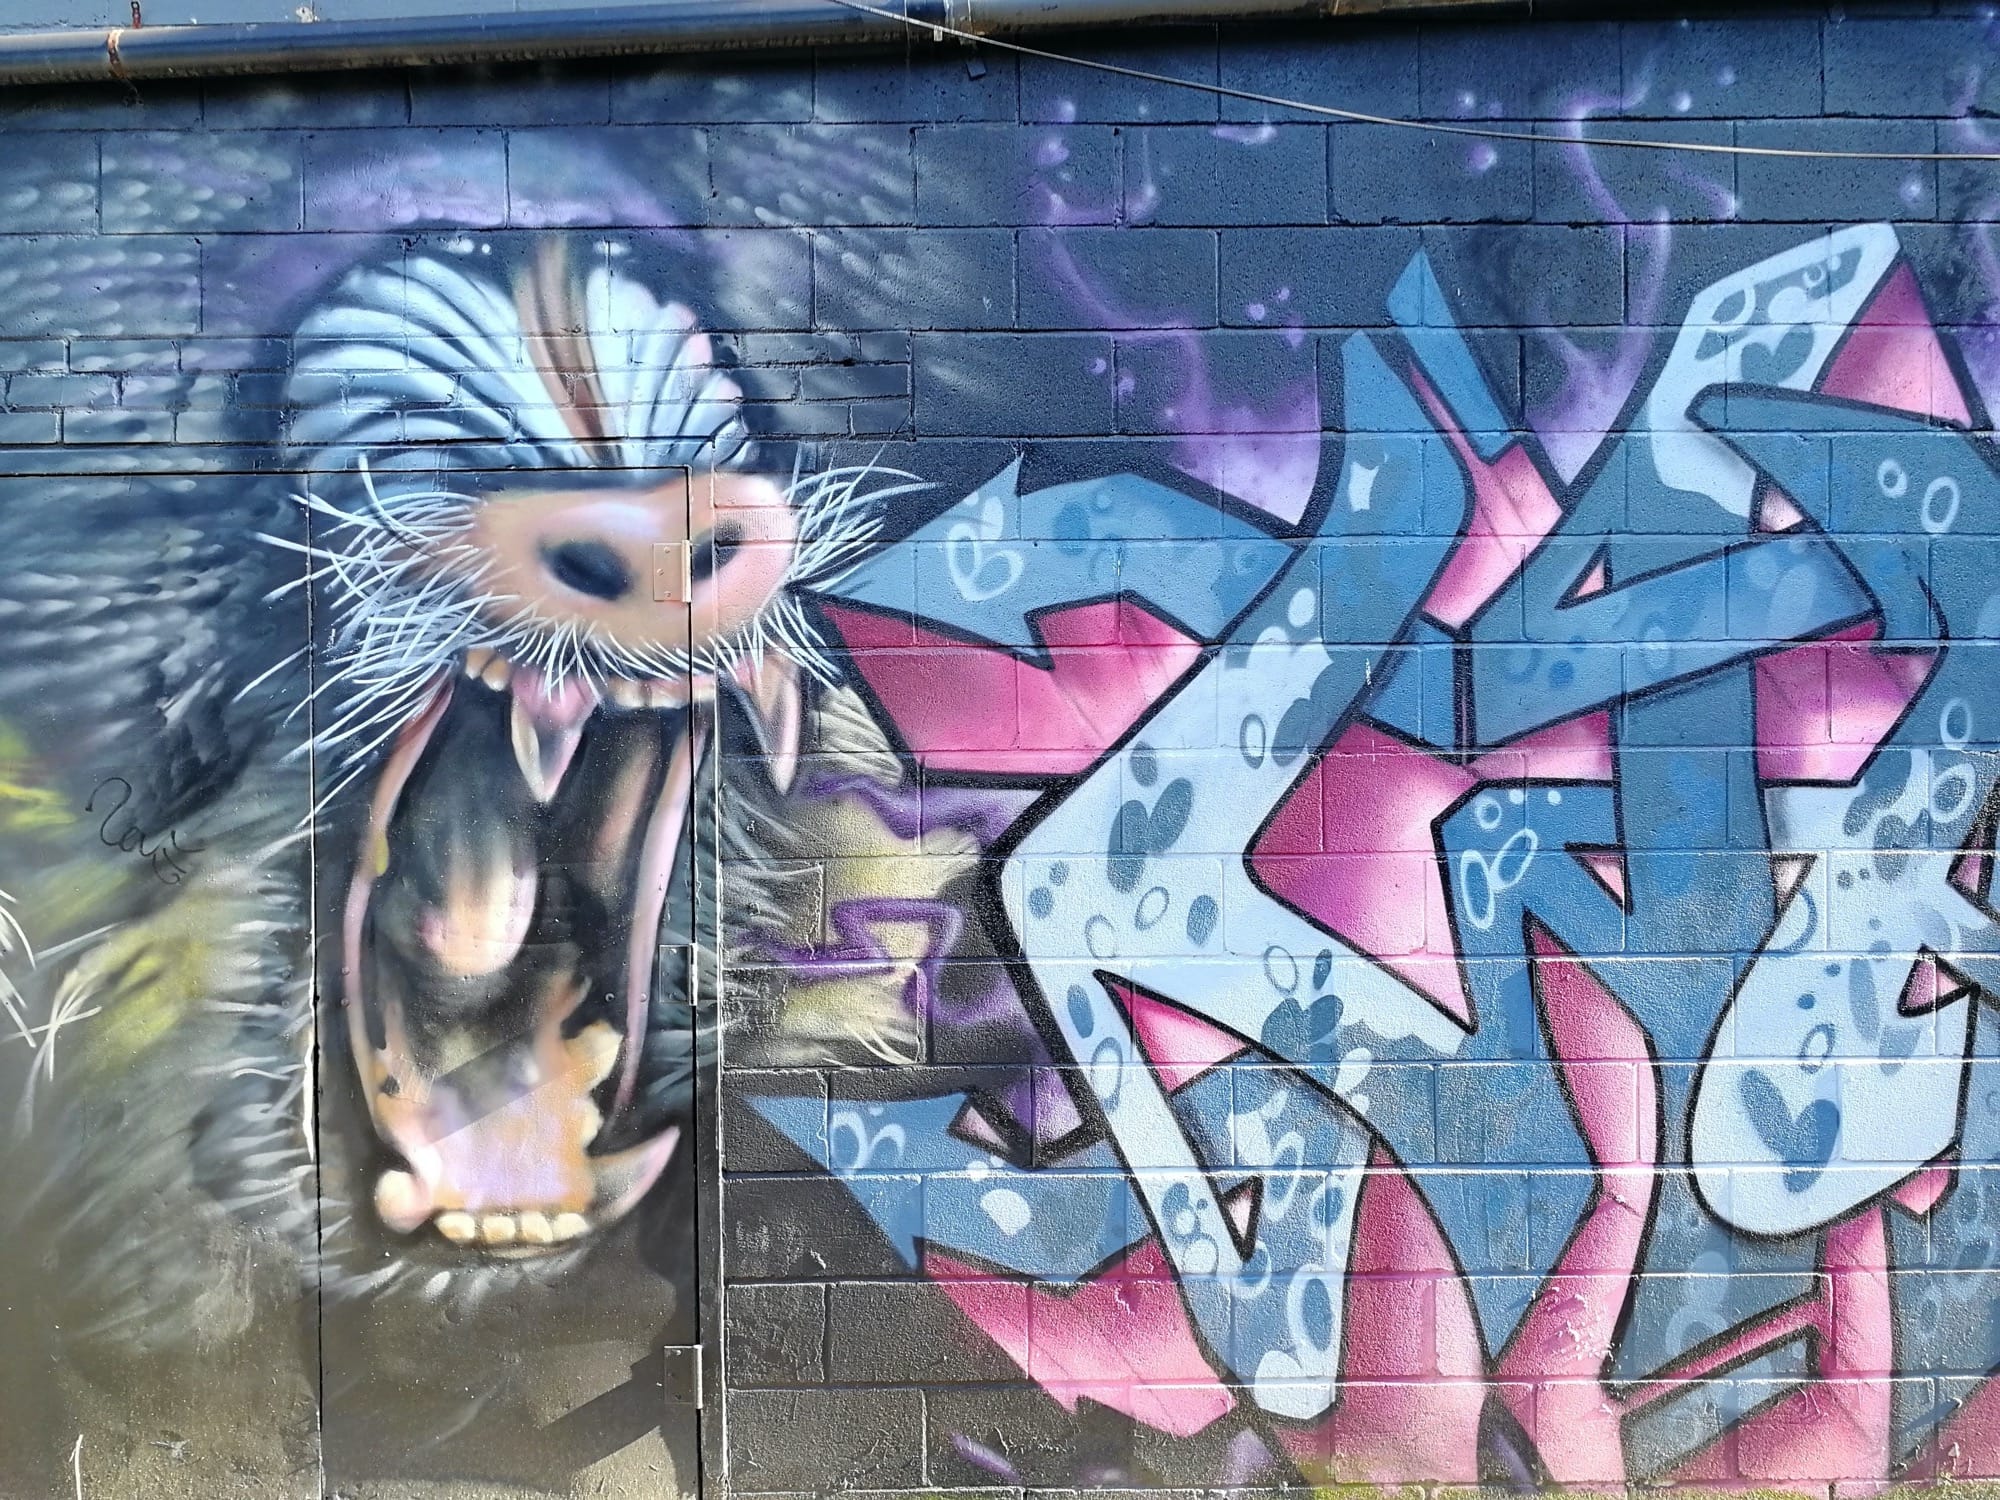 Graffiti 2444  captured by Rabot in Toronto Canada